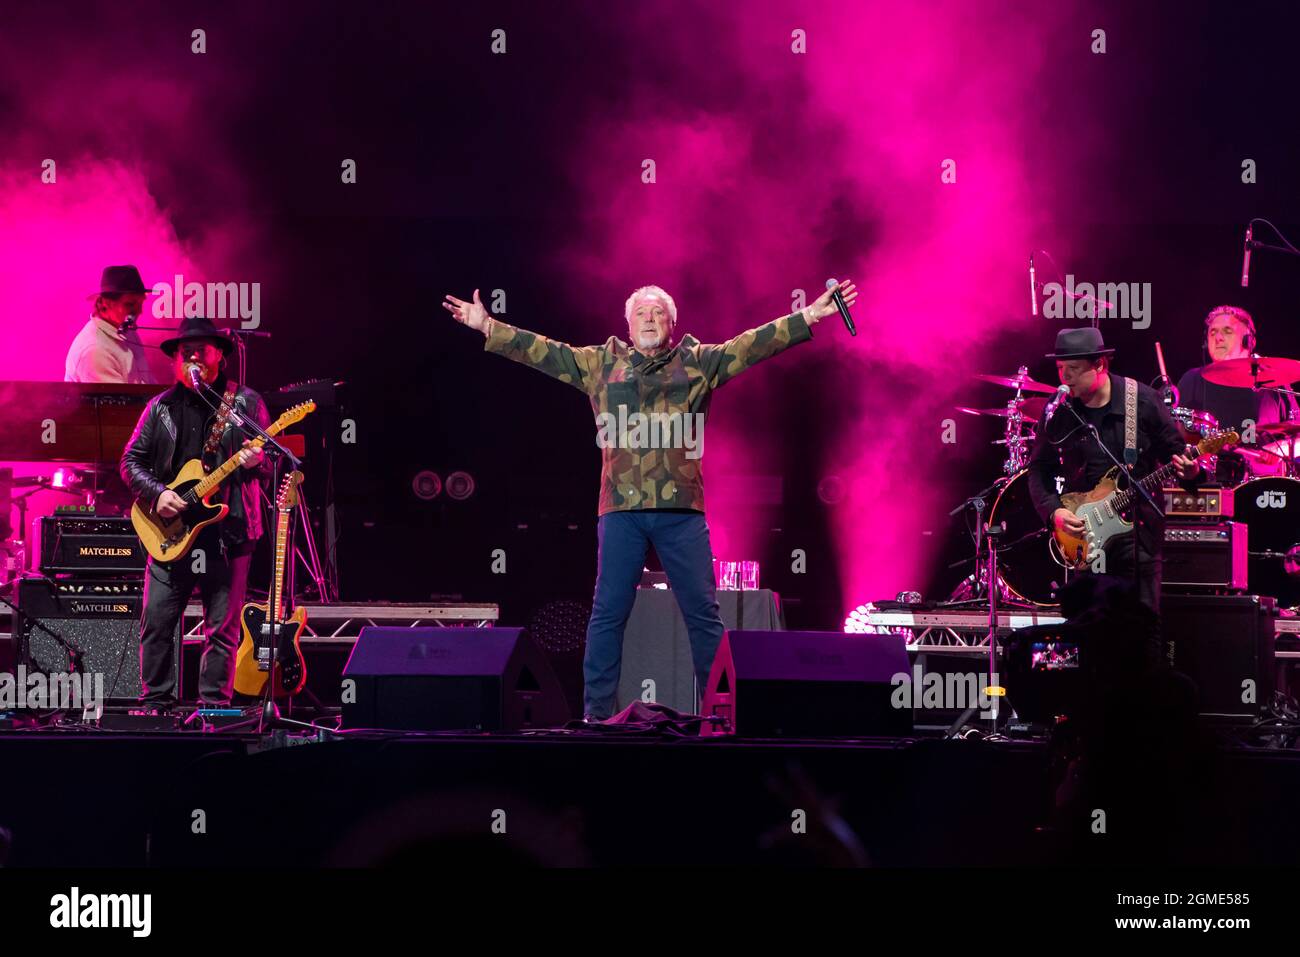 Newport, Isle of Wight, UK, Friday, 17th September 2021 Tom Jones performs live at the Isle of Wight festival Seaclose Park. Credit: DavidJensen / Empics Entertainment / Alamy Live News Stock Photo